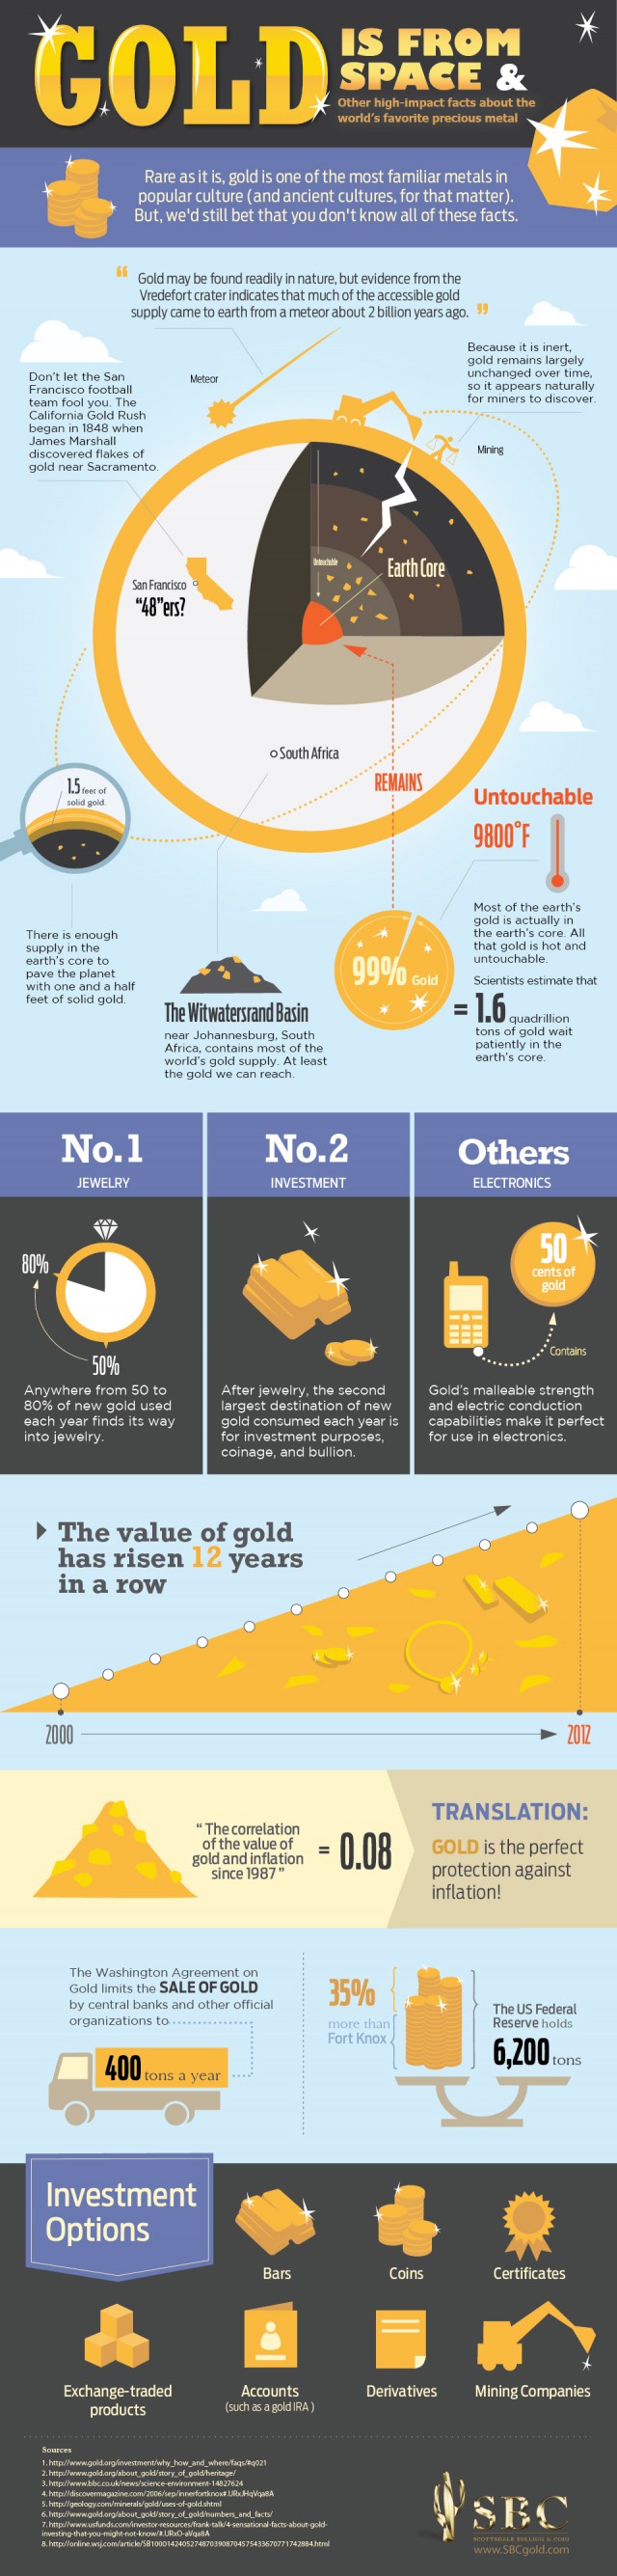 sbc-gold-facts-infographic-640x2670